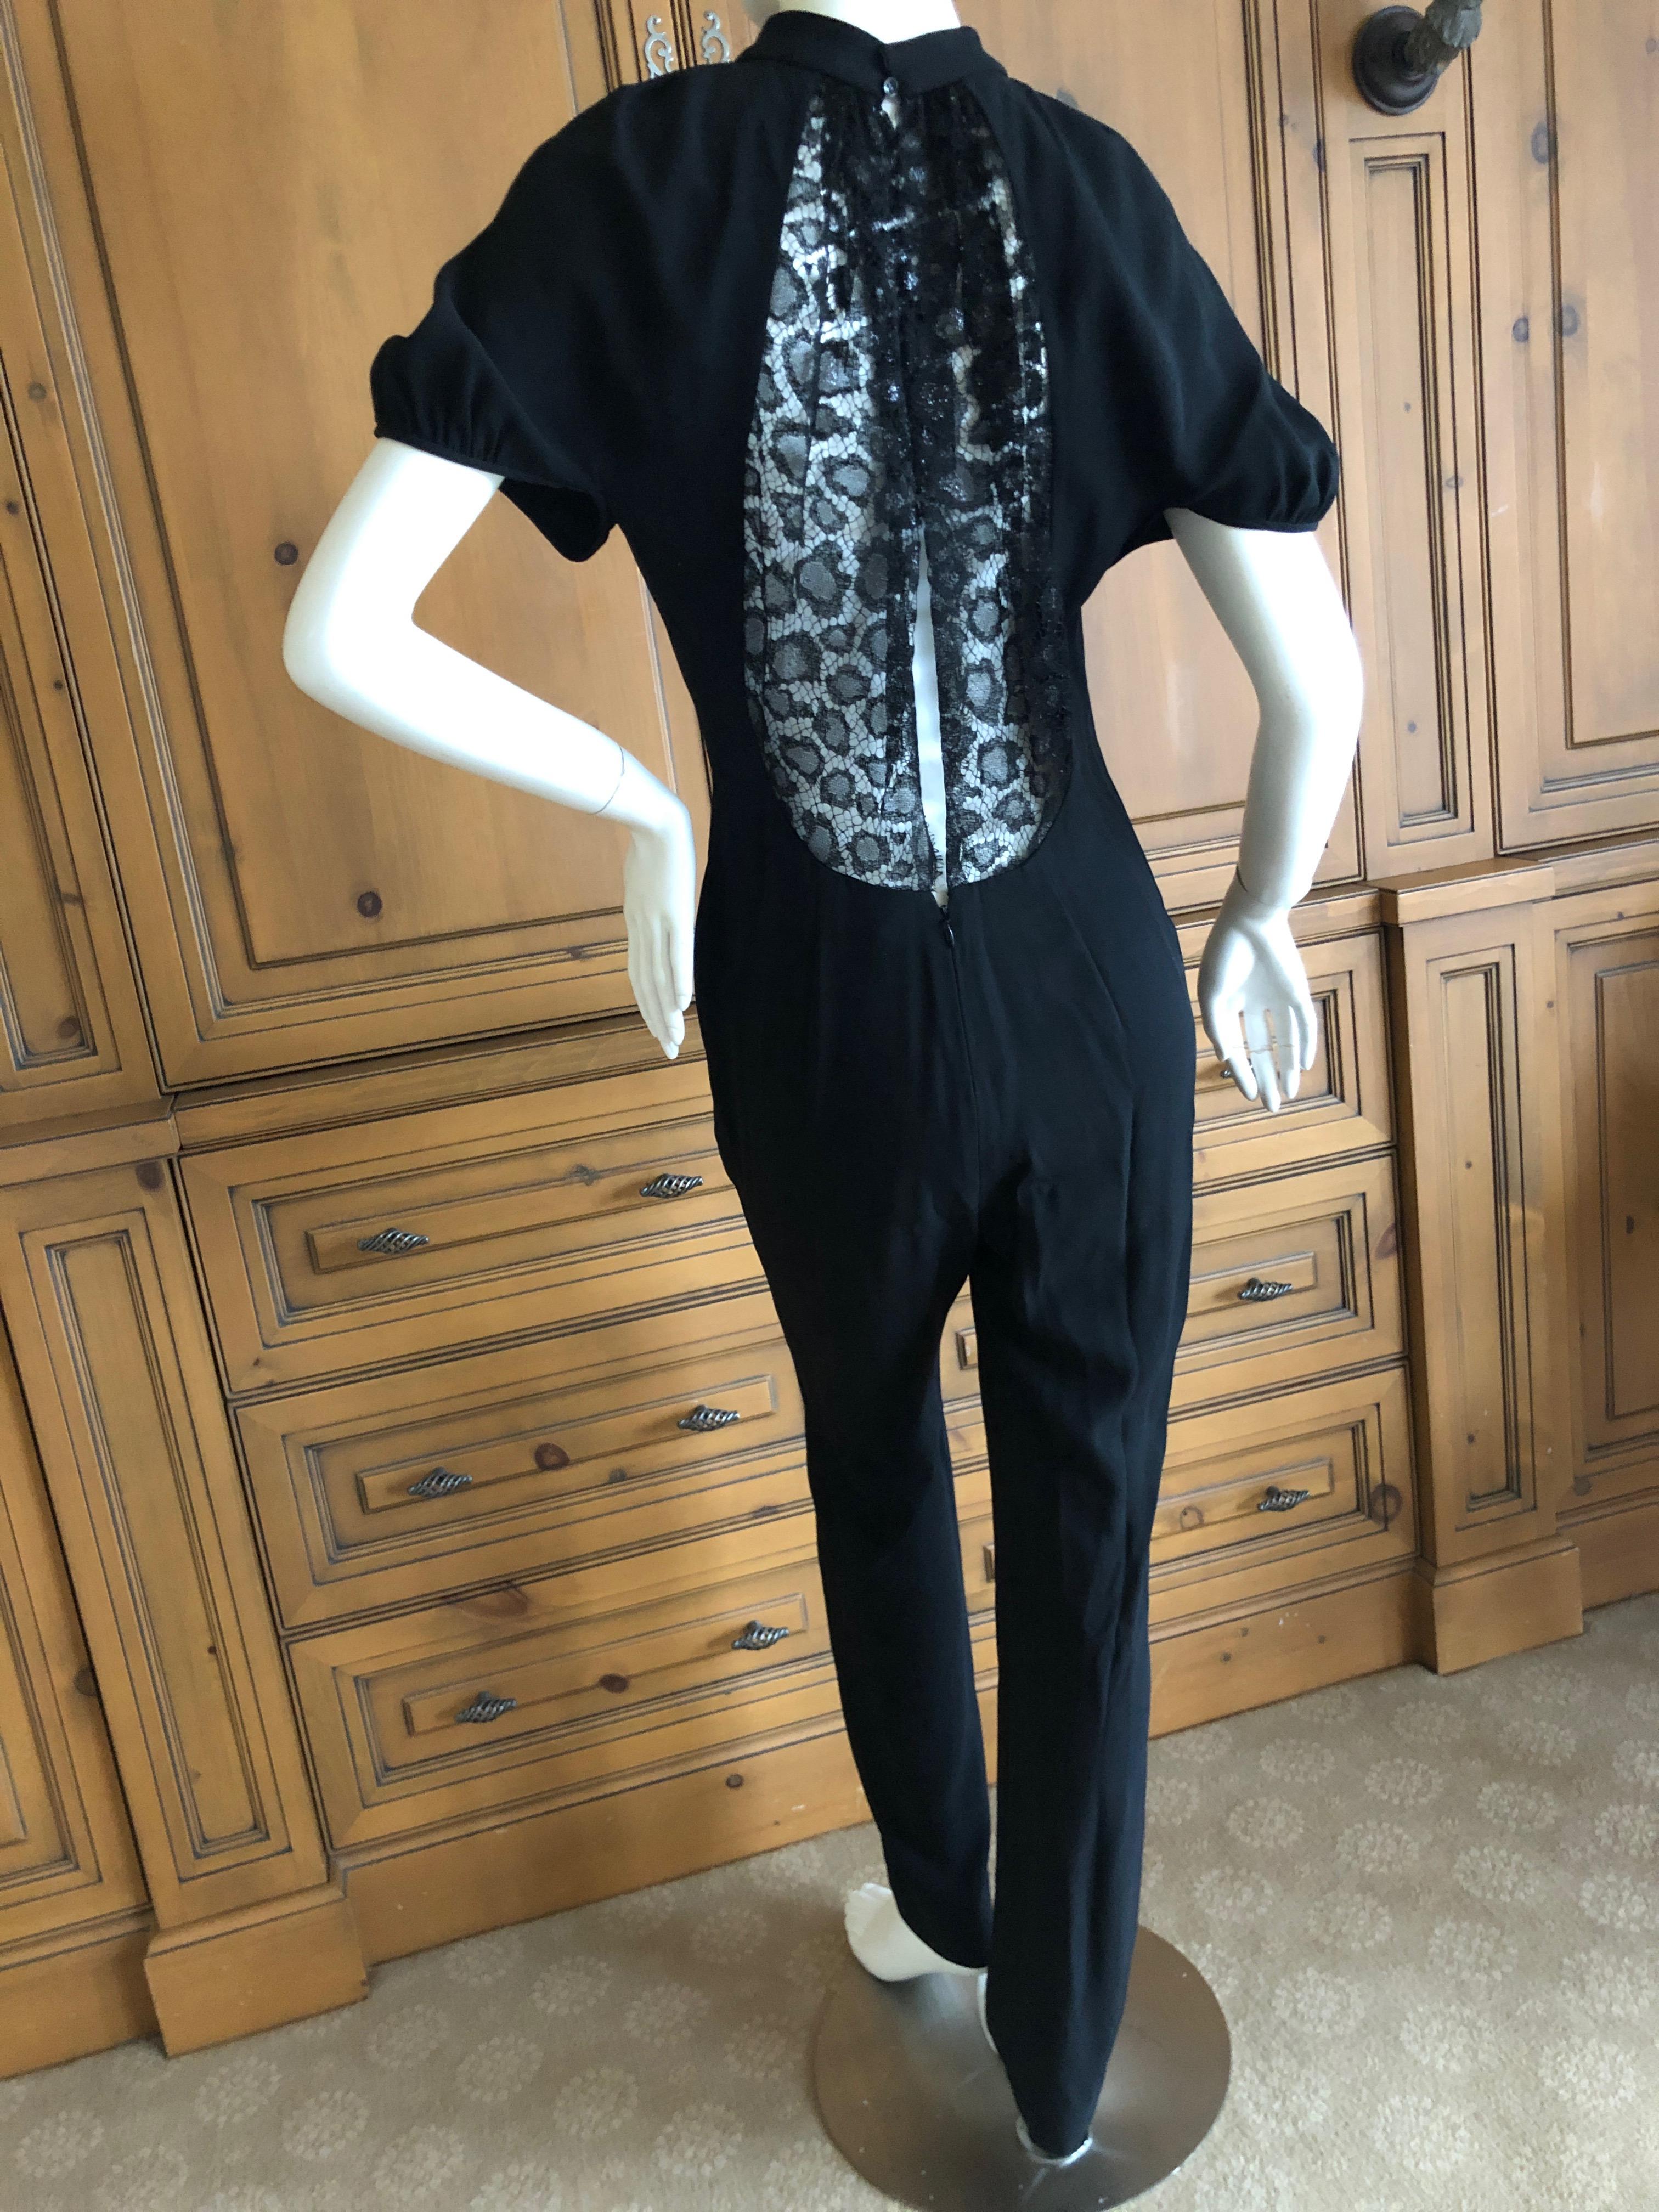 Yves Saint Laurent by Tom Ford Black Jumpsuit with Sheer Black Lace Back In Excellent Condition For Sale In Cloverdale, CA